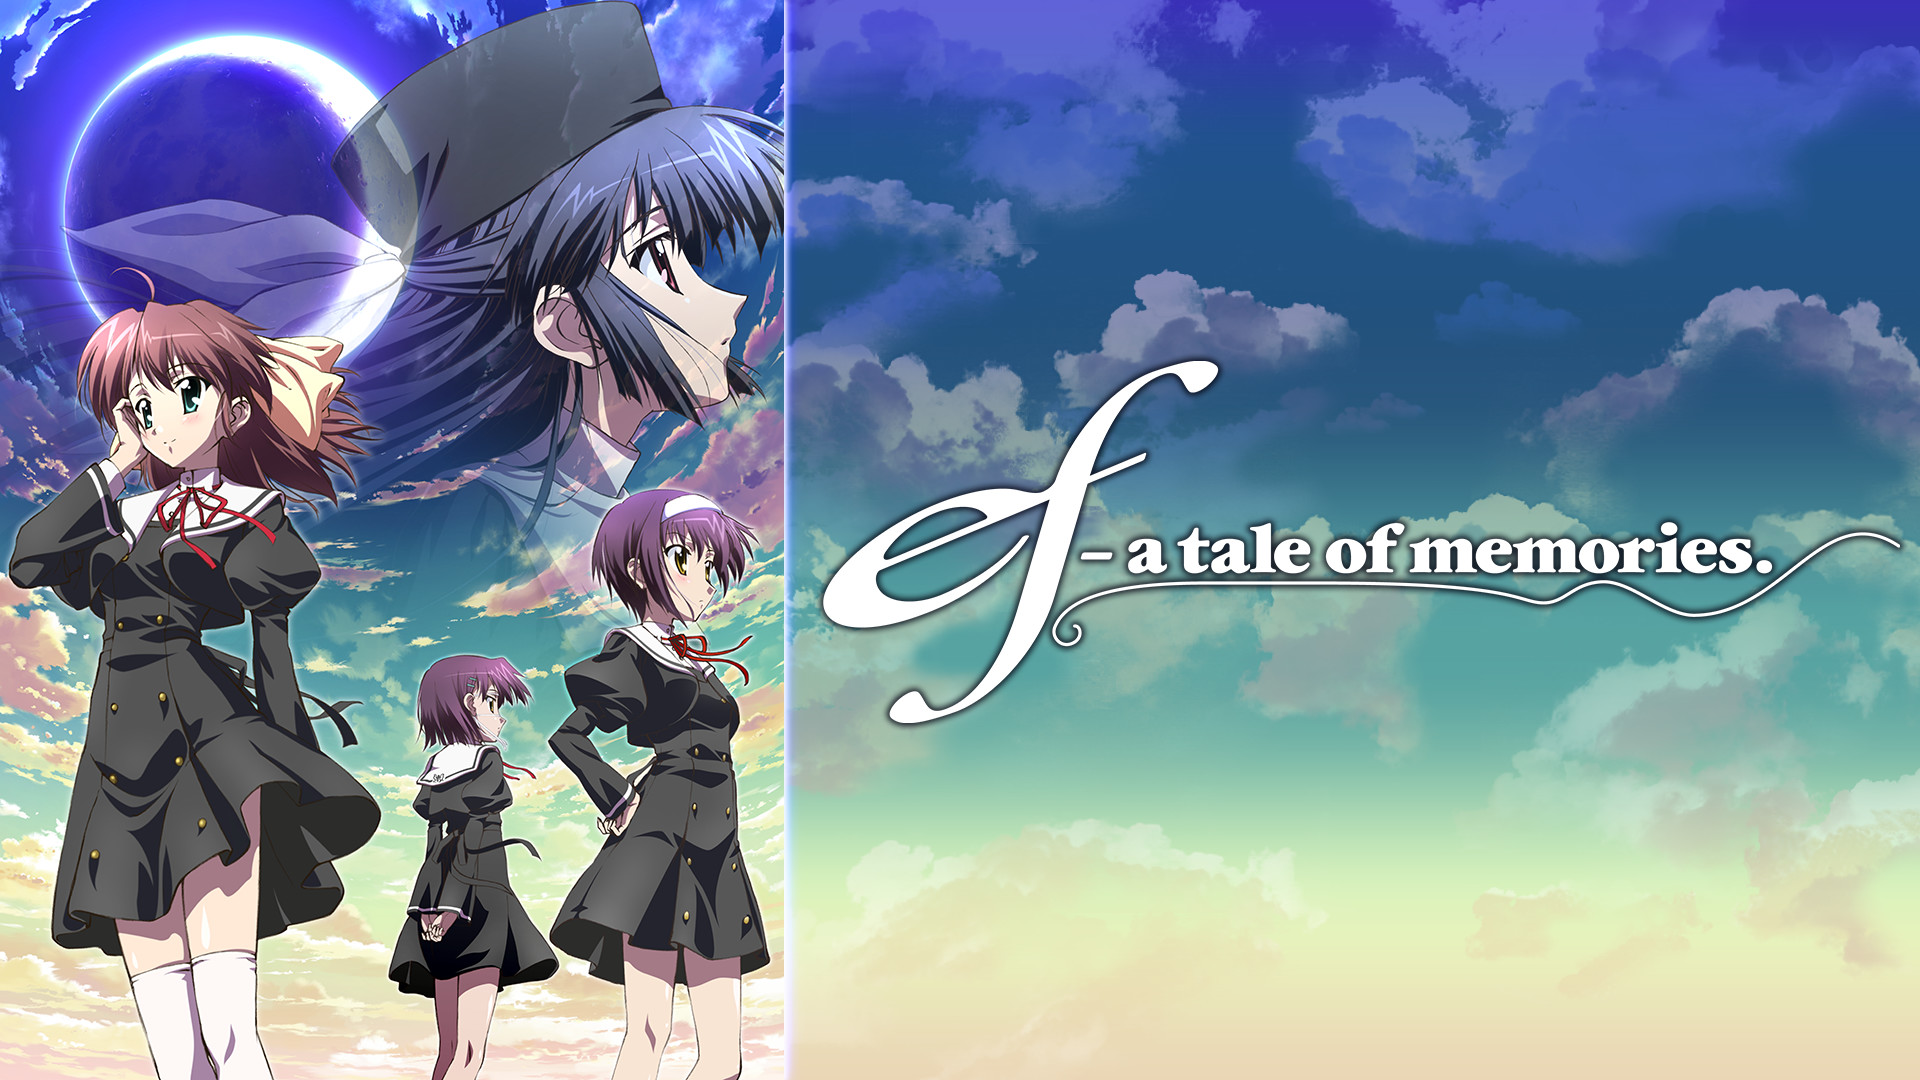 ef - a tale of memories. | アニメ動画見放題 | dアニメストア